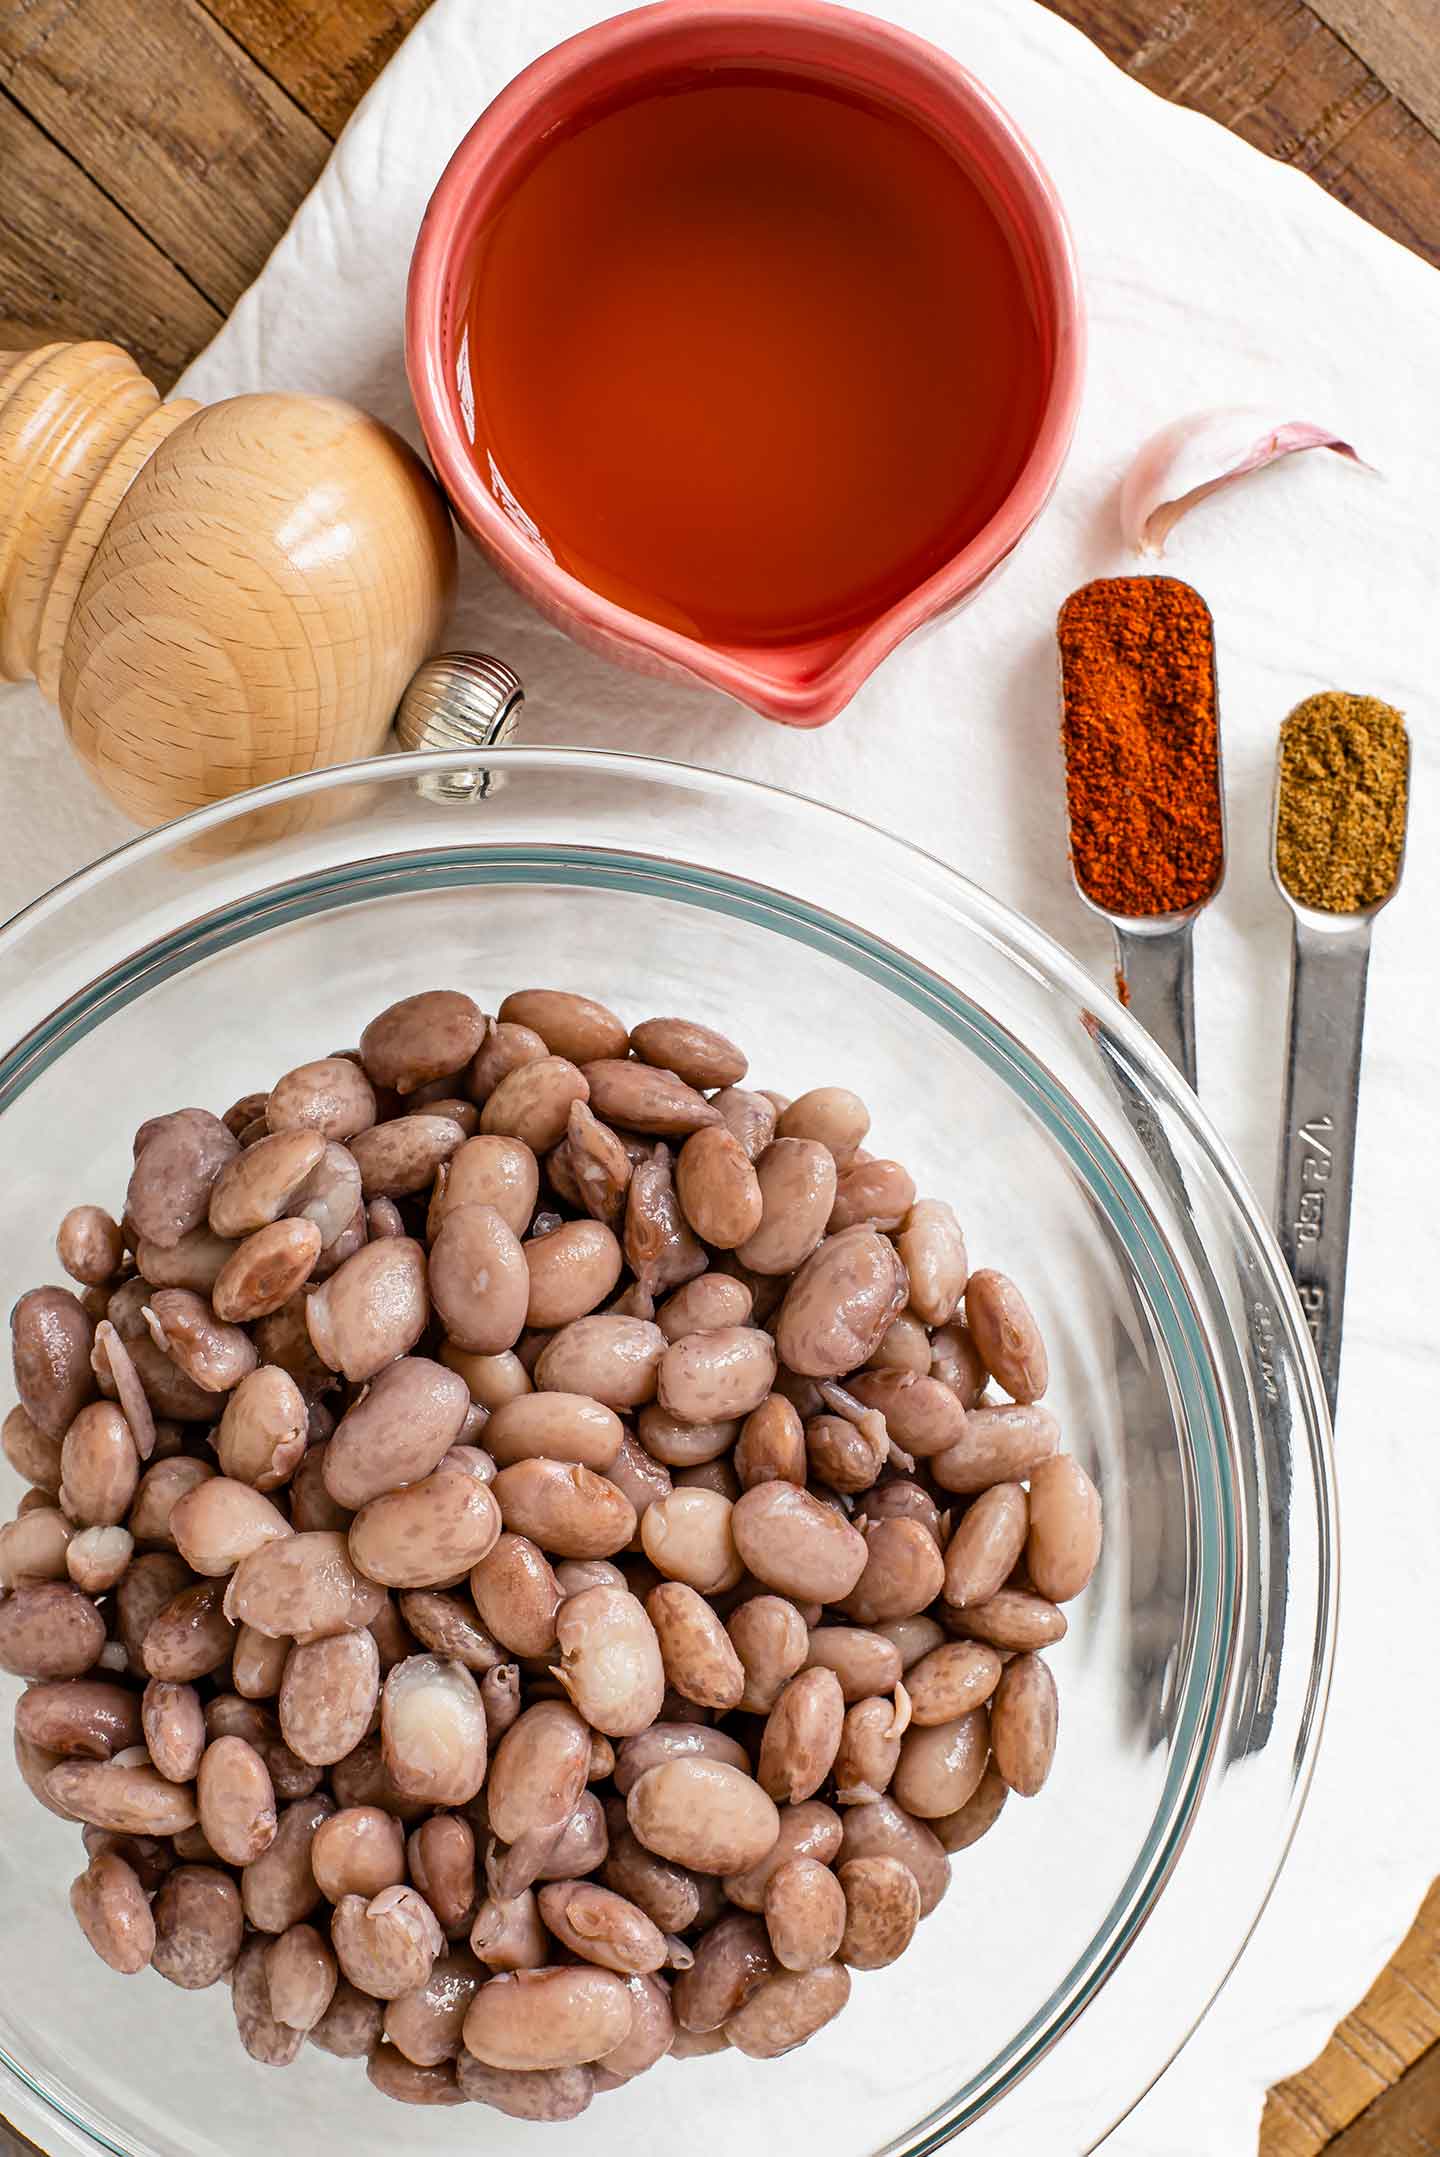 Top down view of pinto beans in a glass bowl. Arranged around the beans are seasonings, a clove of garlic, and a small bowl of broth.